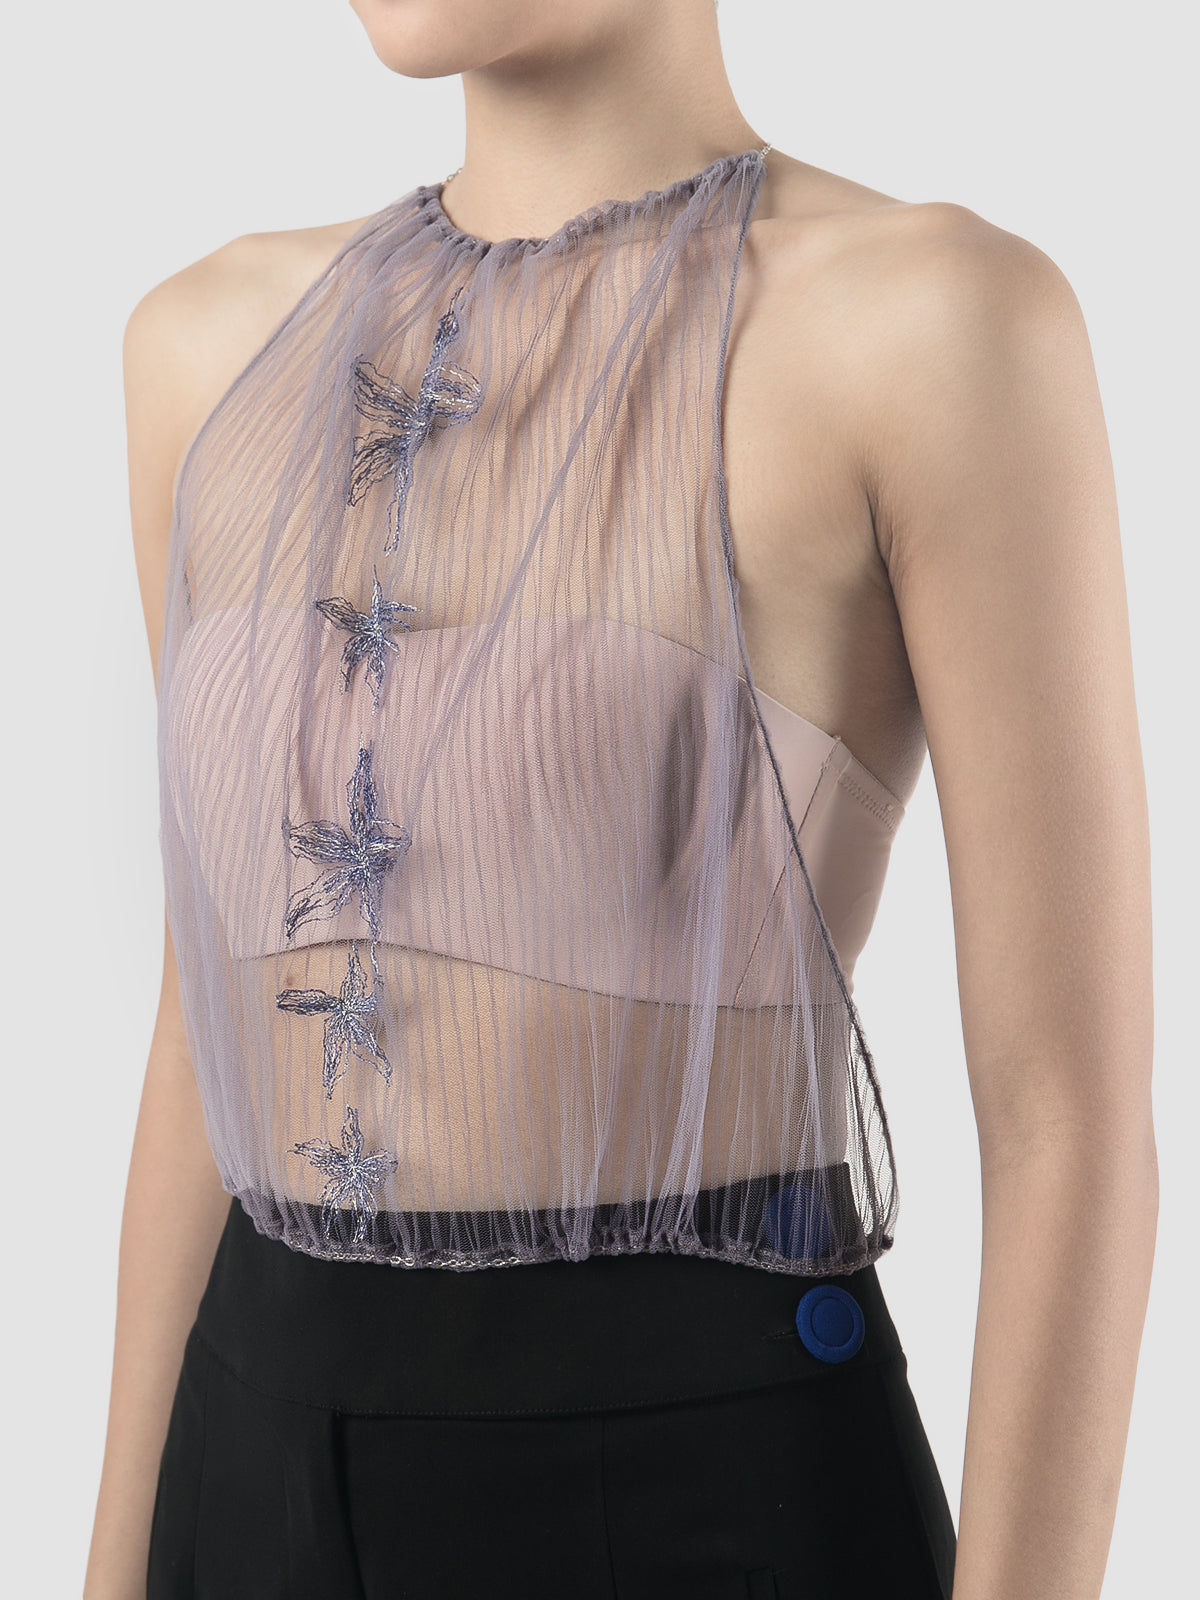 Gorden sheer lilac halter chain top with lilac-silver embroidery